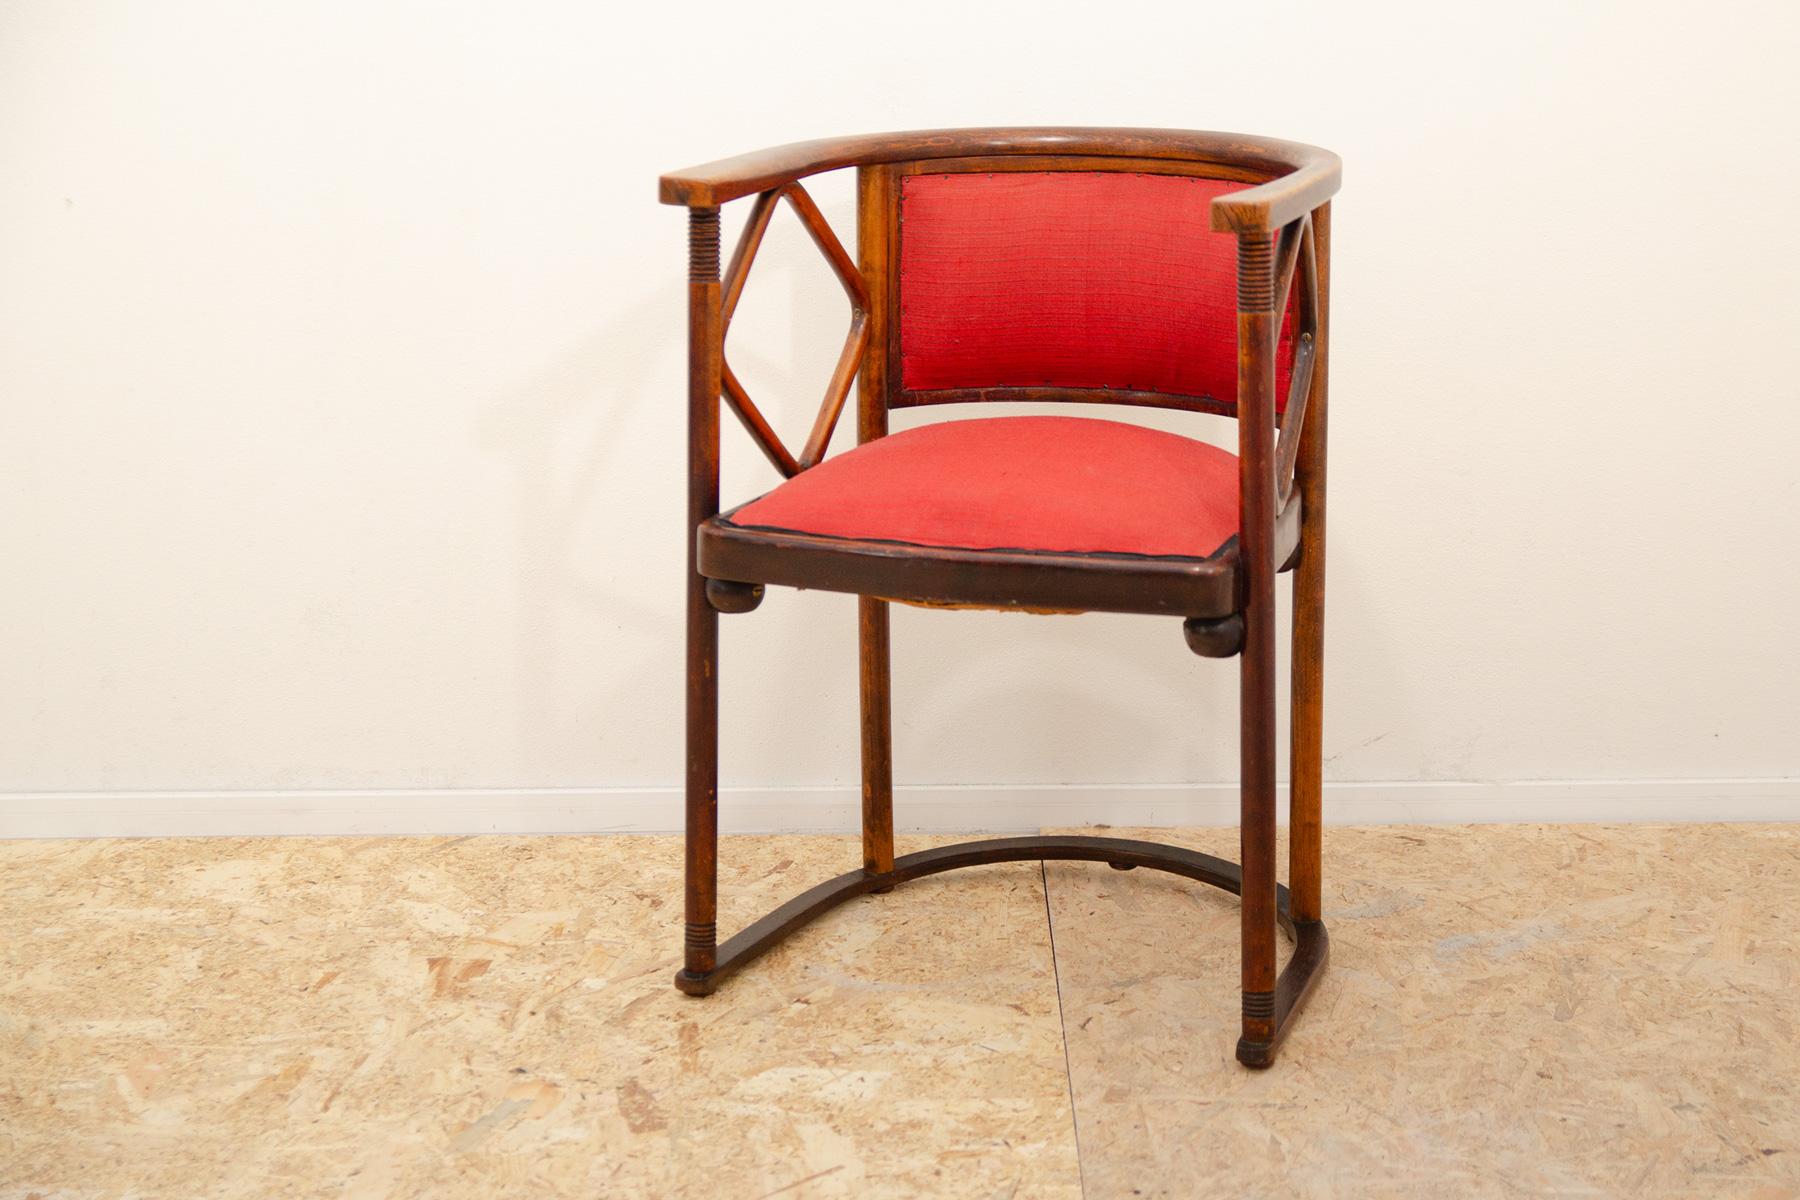 This world-famous upholstered bentwood chair was designed by Josef Hoffmann for the “Fledermaus cabaret” in Vienna in 1905. It was part of a set a seating furniture including the famous benches and chairs. In good condition, shows signs of age and